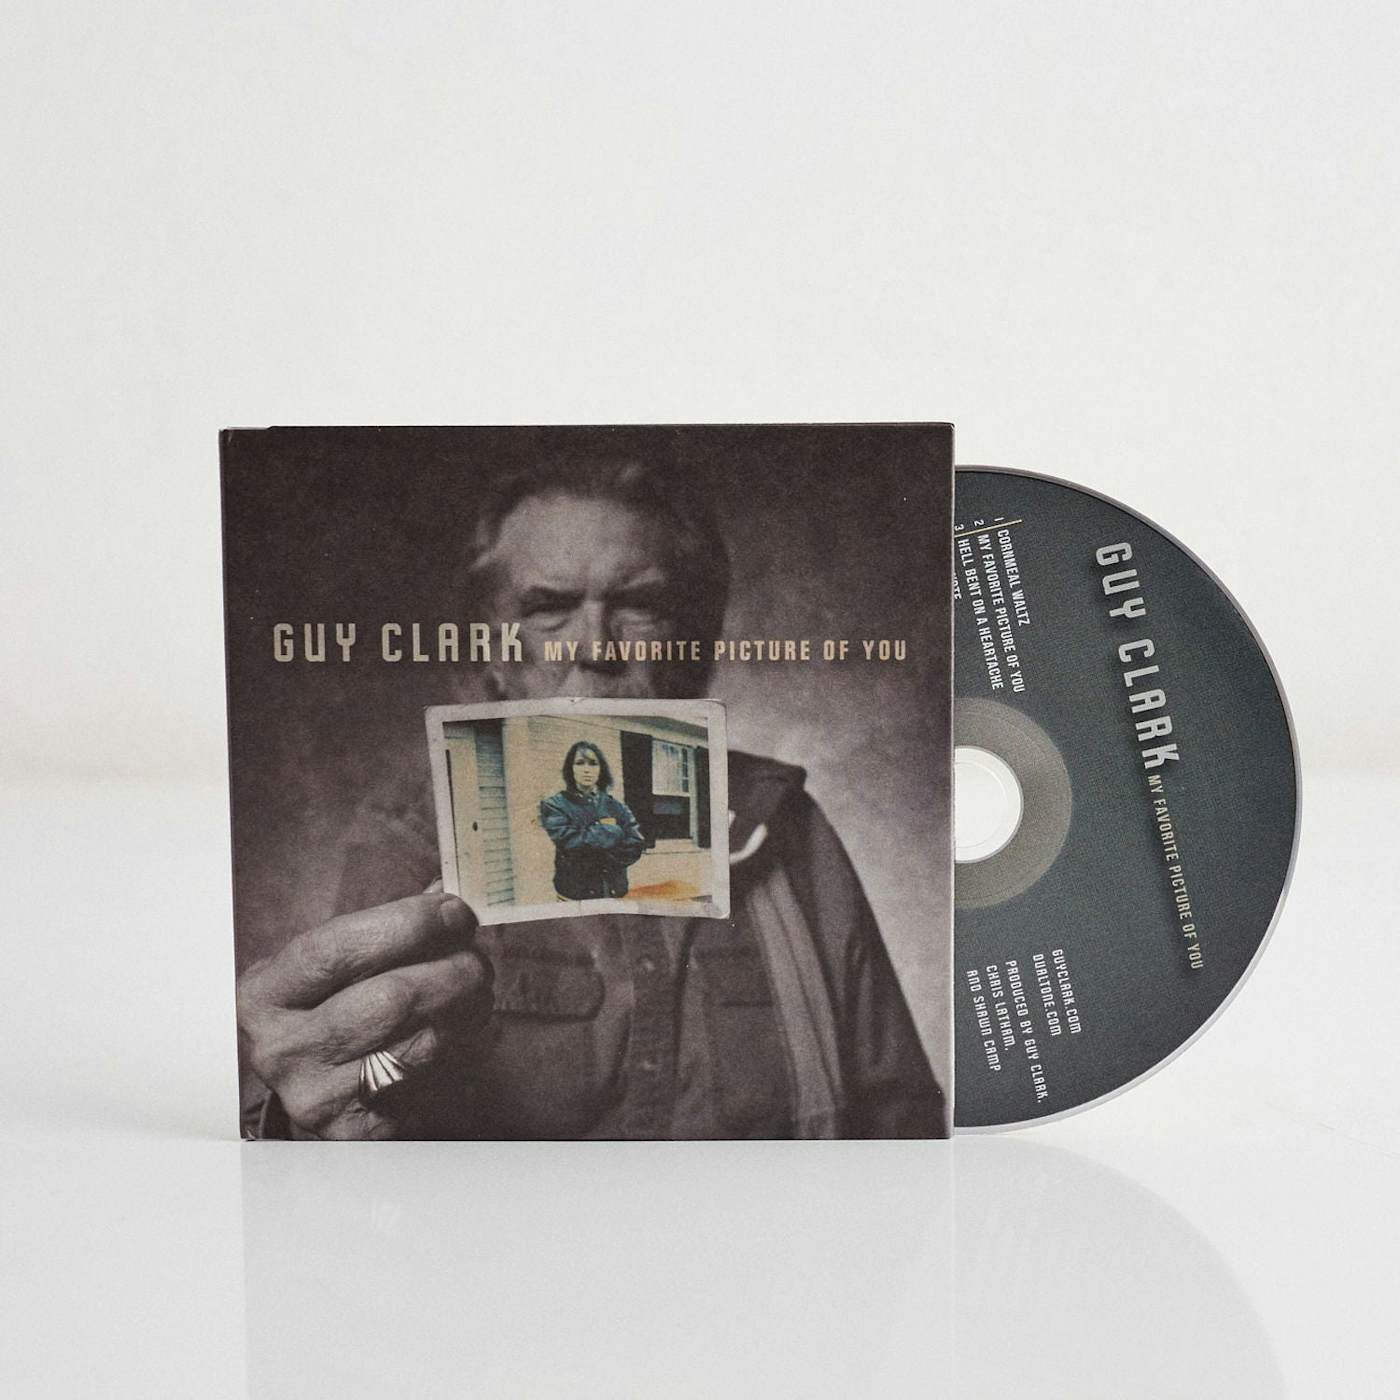 Guy Clark My Favorite Picture Of You (CD)